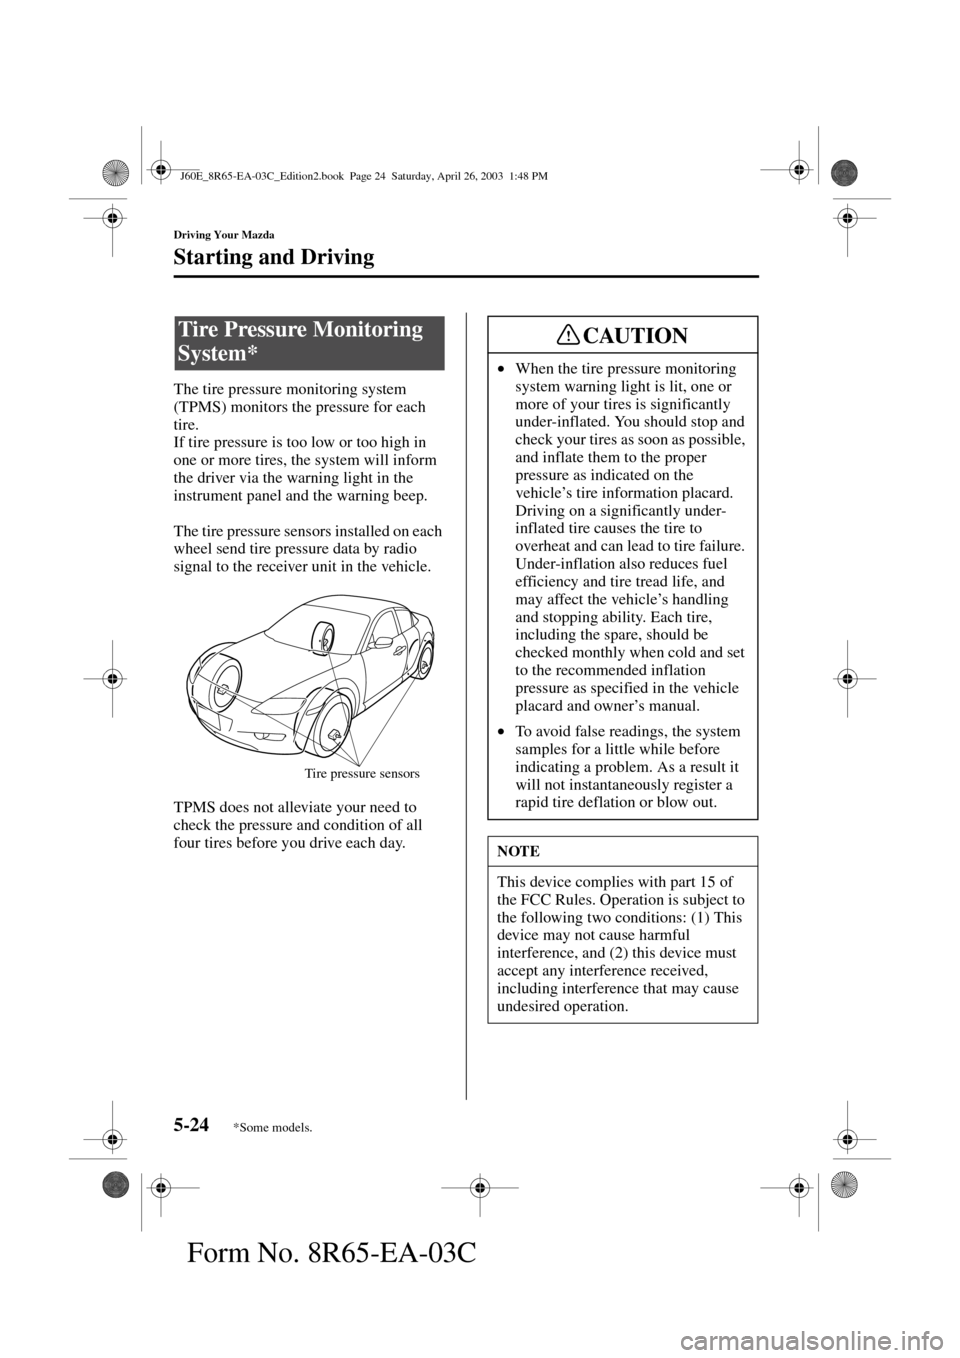 MAZDA MODEL RX 8 2004  Owners Manual (in English) 5-24
Driving Your Mazda
Starting and Driving
Form No. 8R65-EA-03C
The tire pressure monitoring system 
(TPMS) monitors the pressure for each 
tire.
If tire pressure is too low or too high in 
one or m